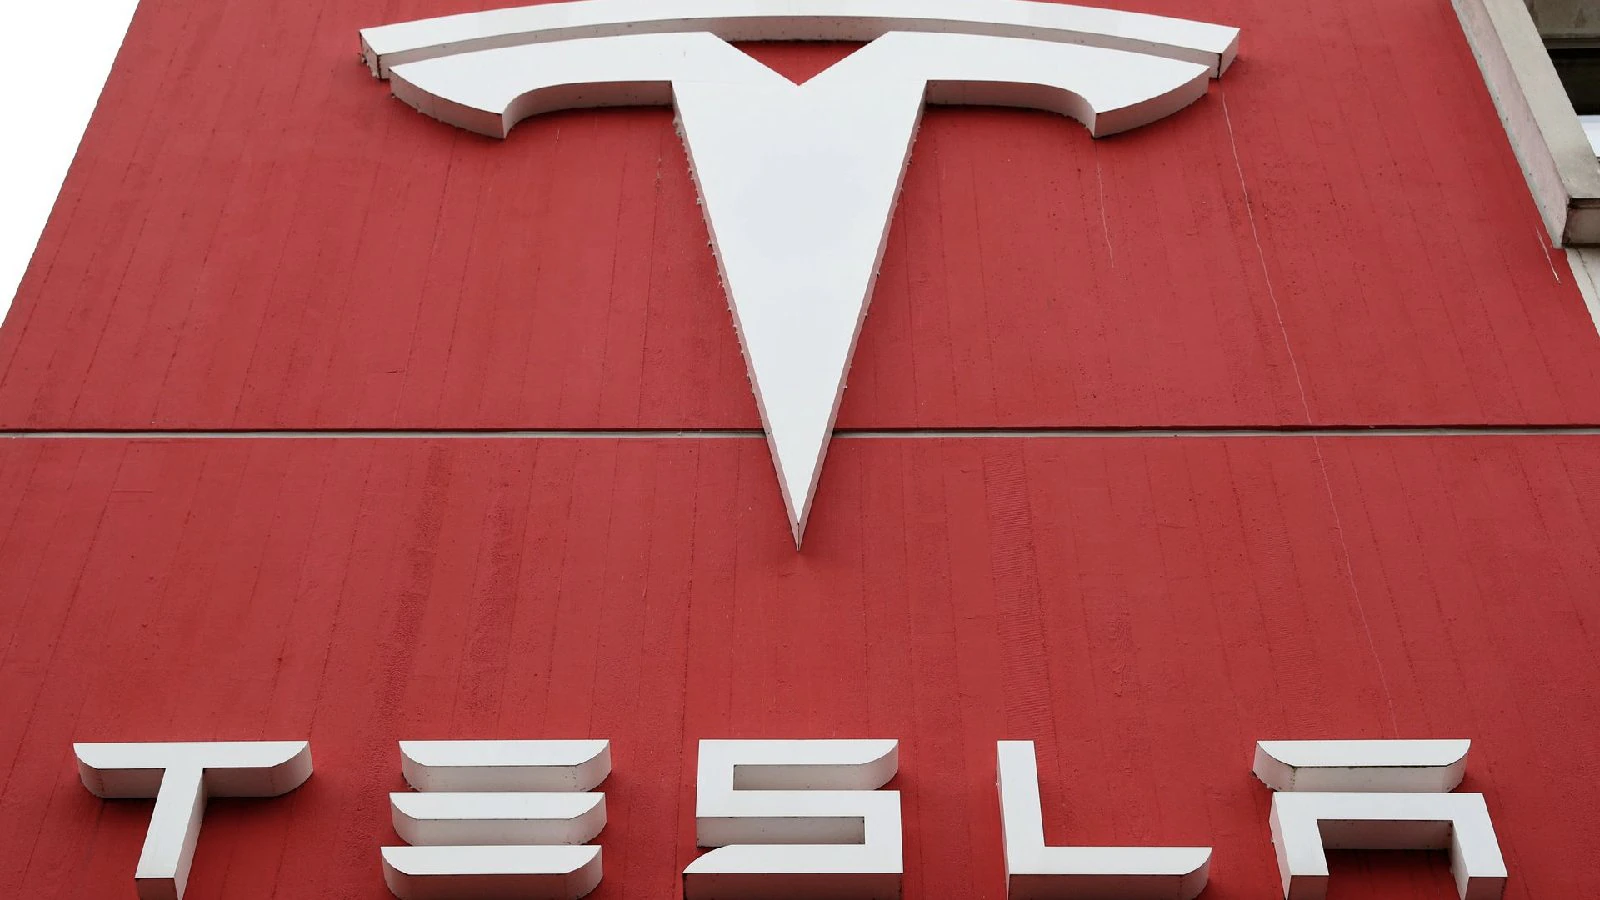 3 High-Ranking Tesla Executives Have Resigned in the Previous Two Weeks, the Latest During the Results Call